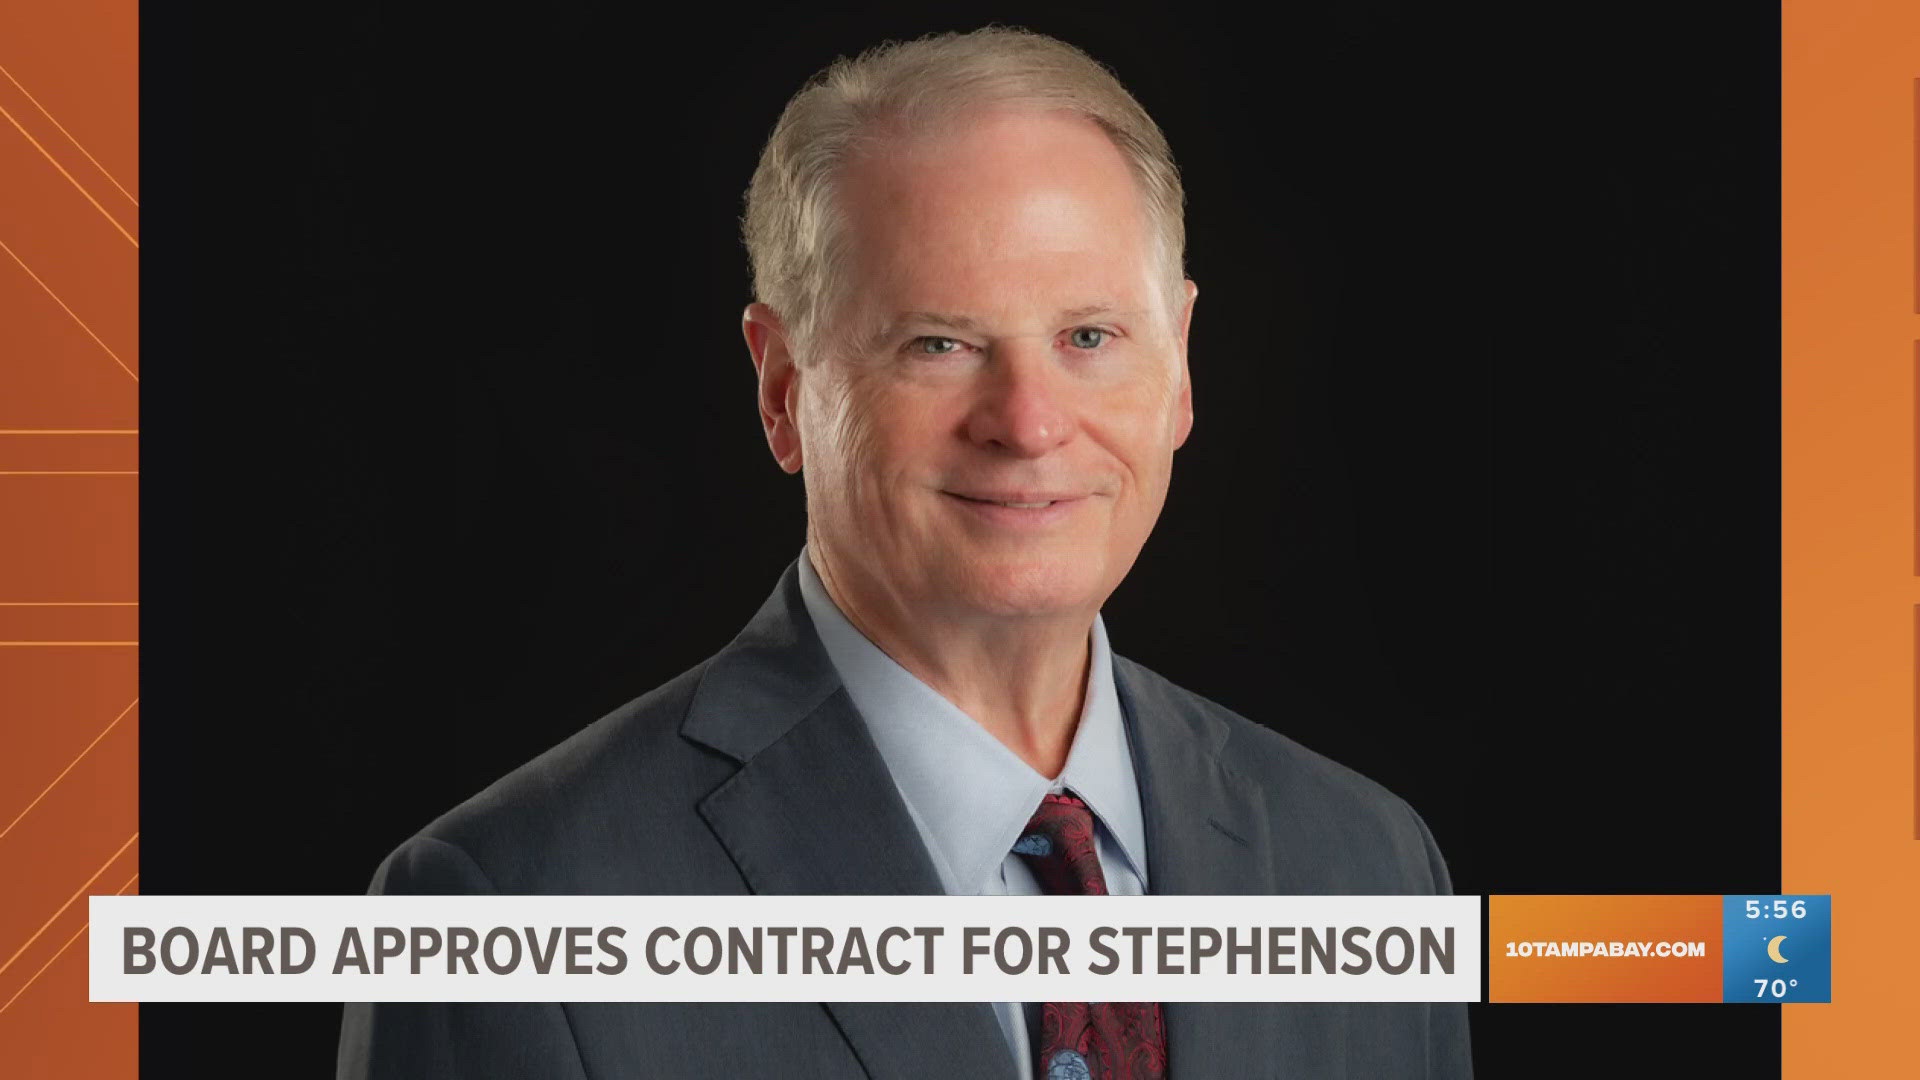 The contract needs to be approved by the Board of Governors before Devin Stephenson starts his new job.